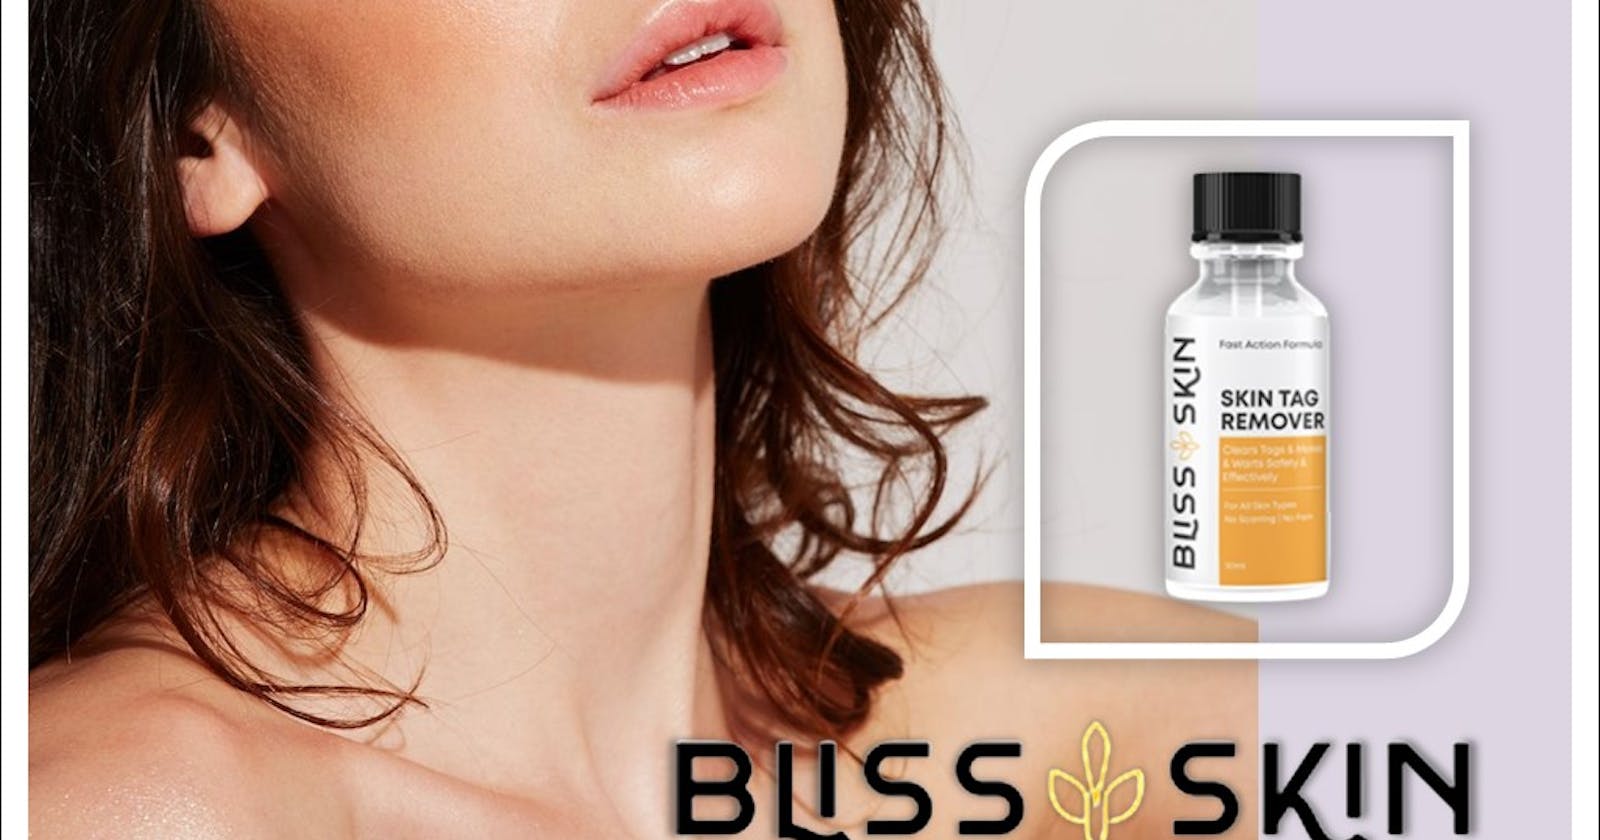 Erase Imperfections: Ultimate Bliss Skin Tag Removal Elixir